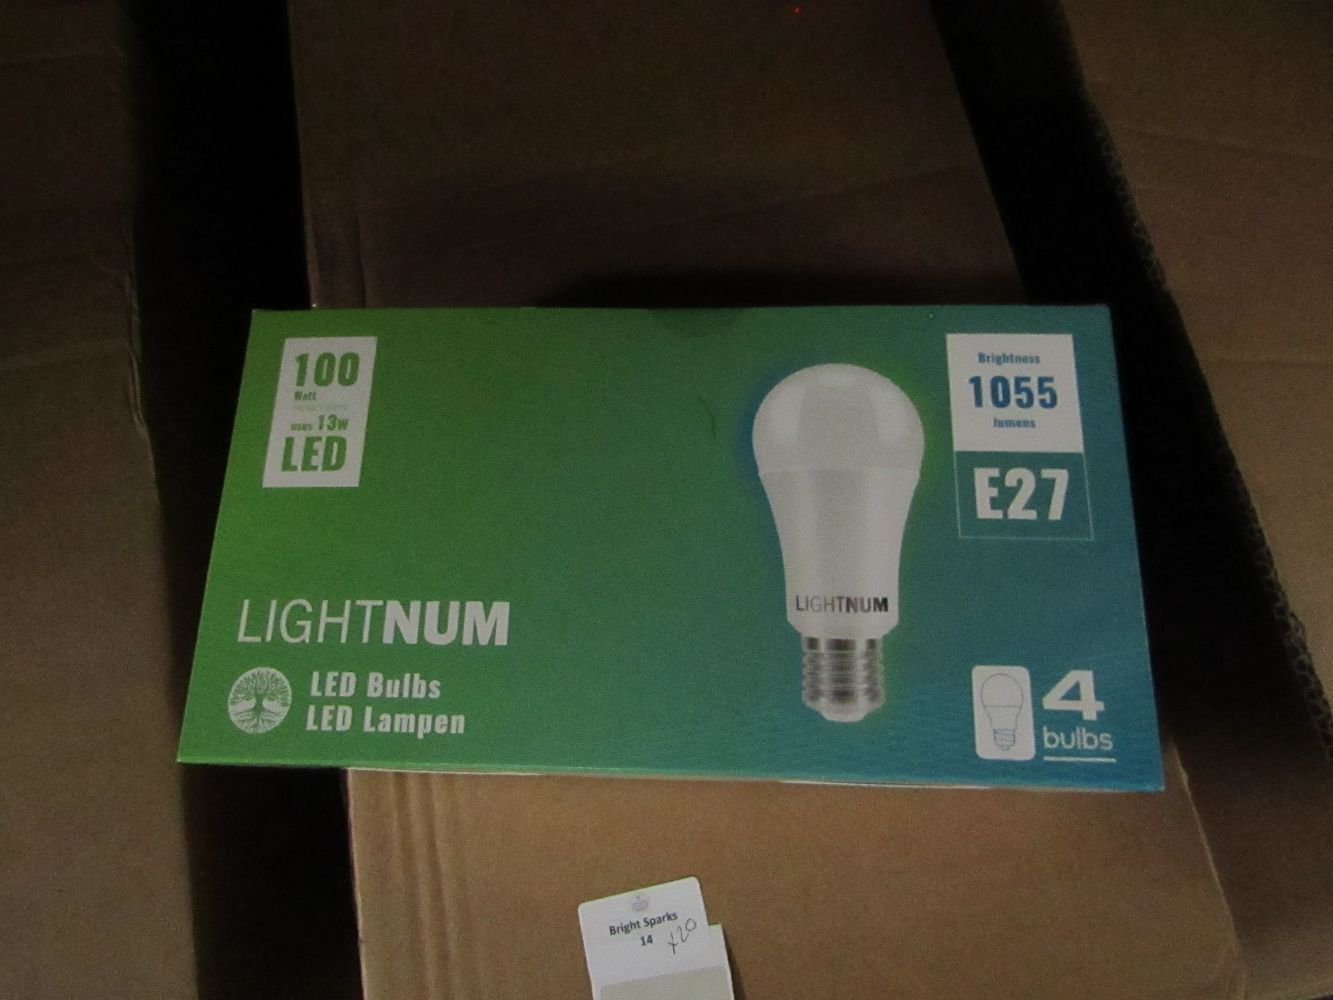 Light bulbs in packs and trade lots